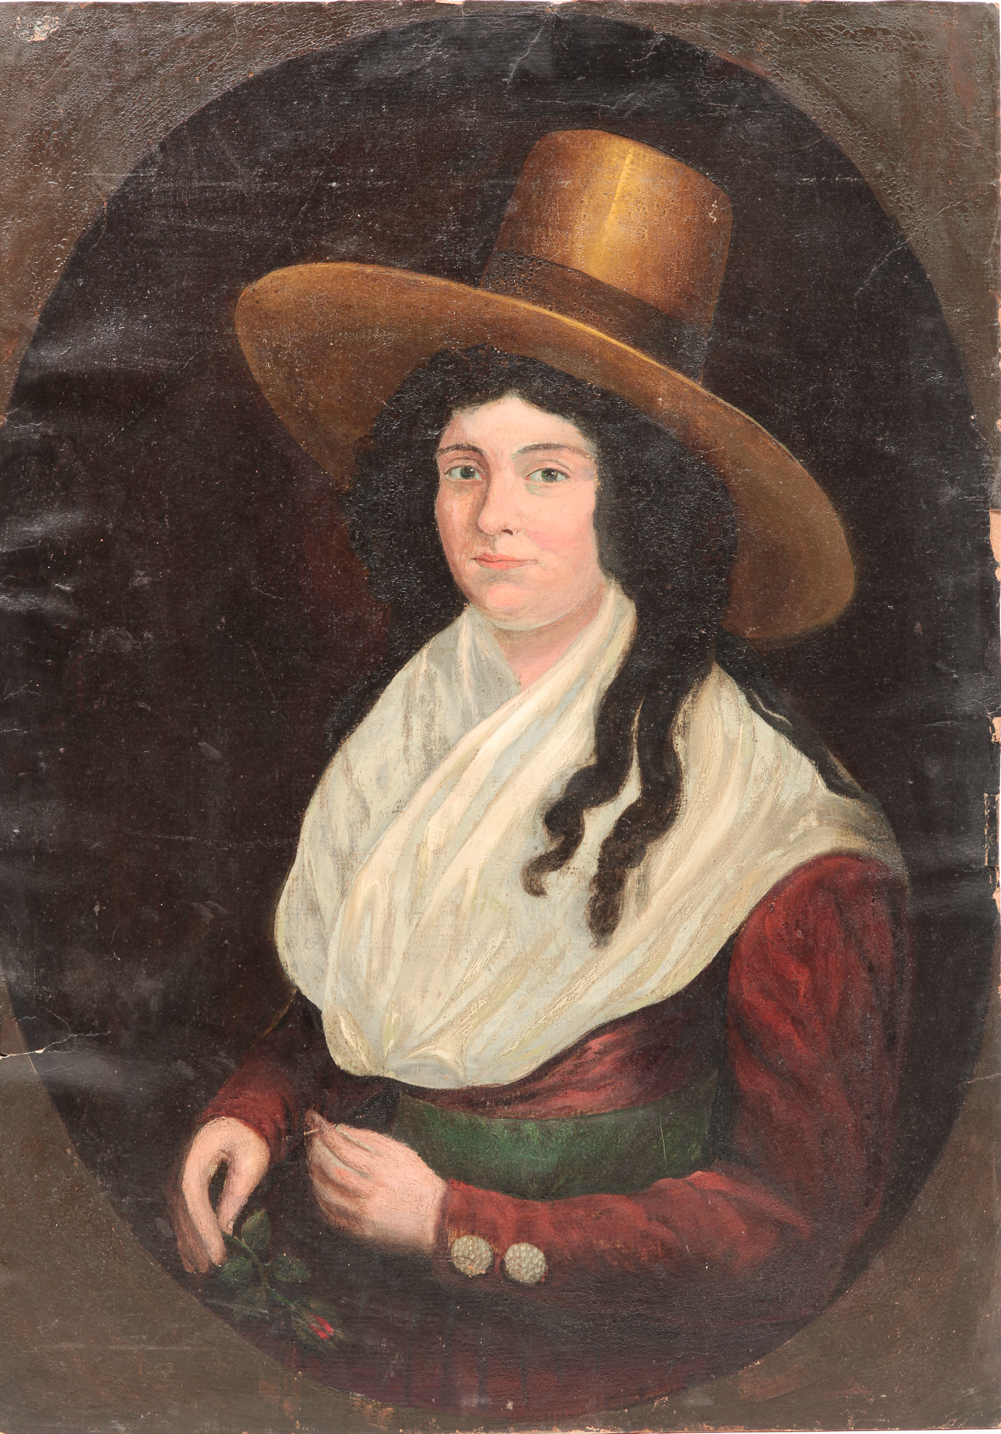 PORTRAIT OF A WOMAN IN TALL HAT.